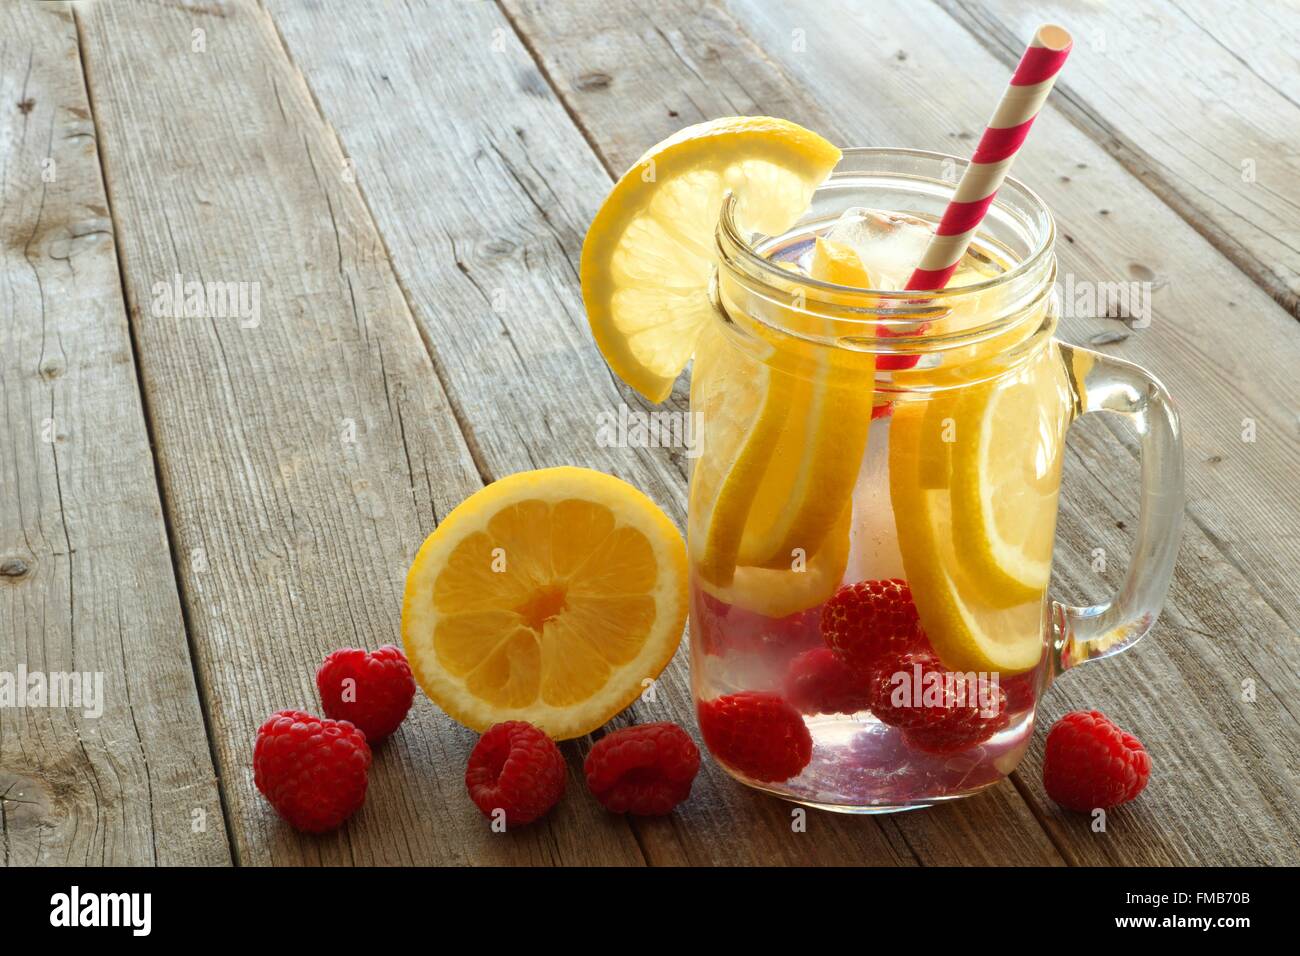 Vitamin water with lemon and raspberries in a jar with straw against a wood background Stock Photo